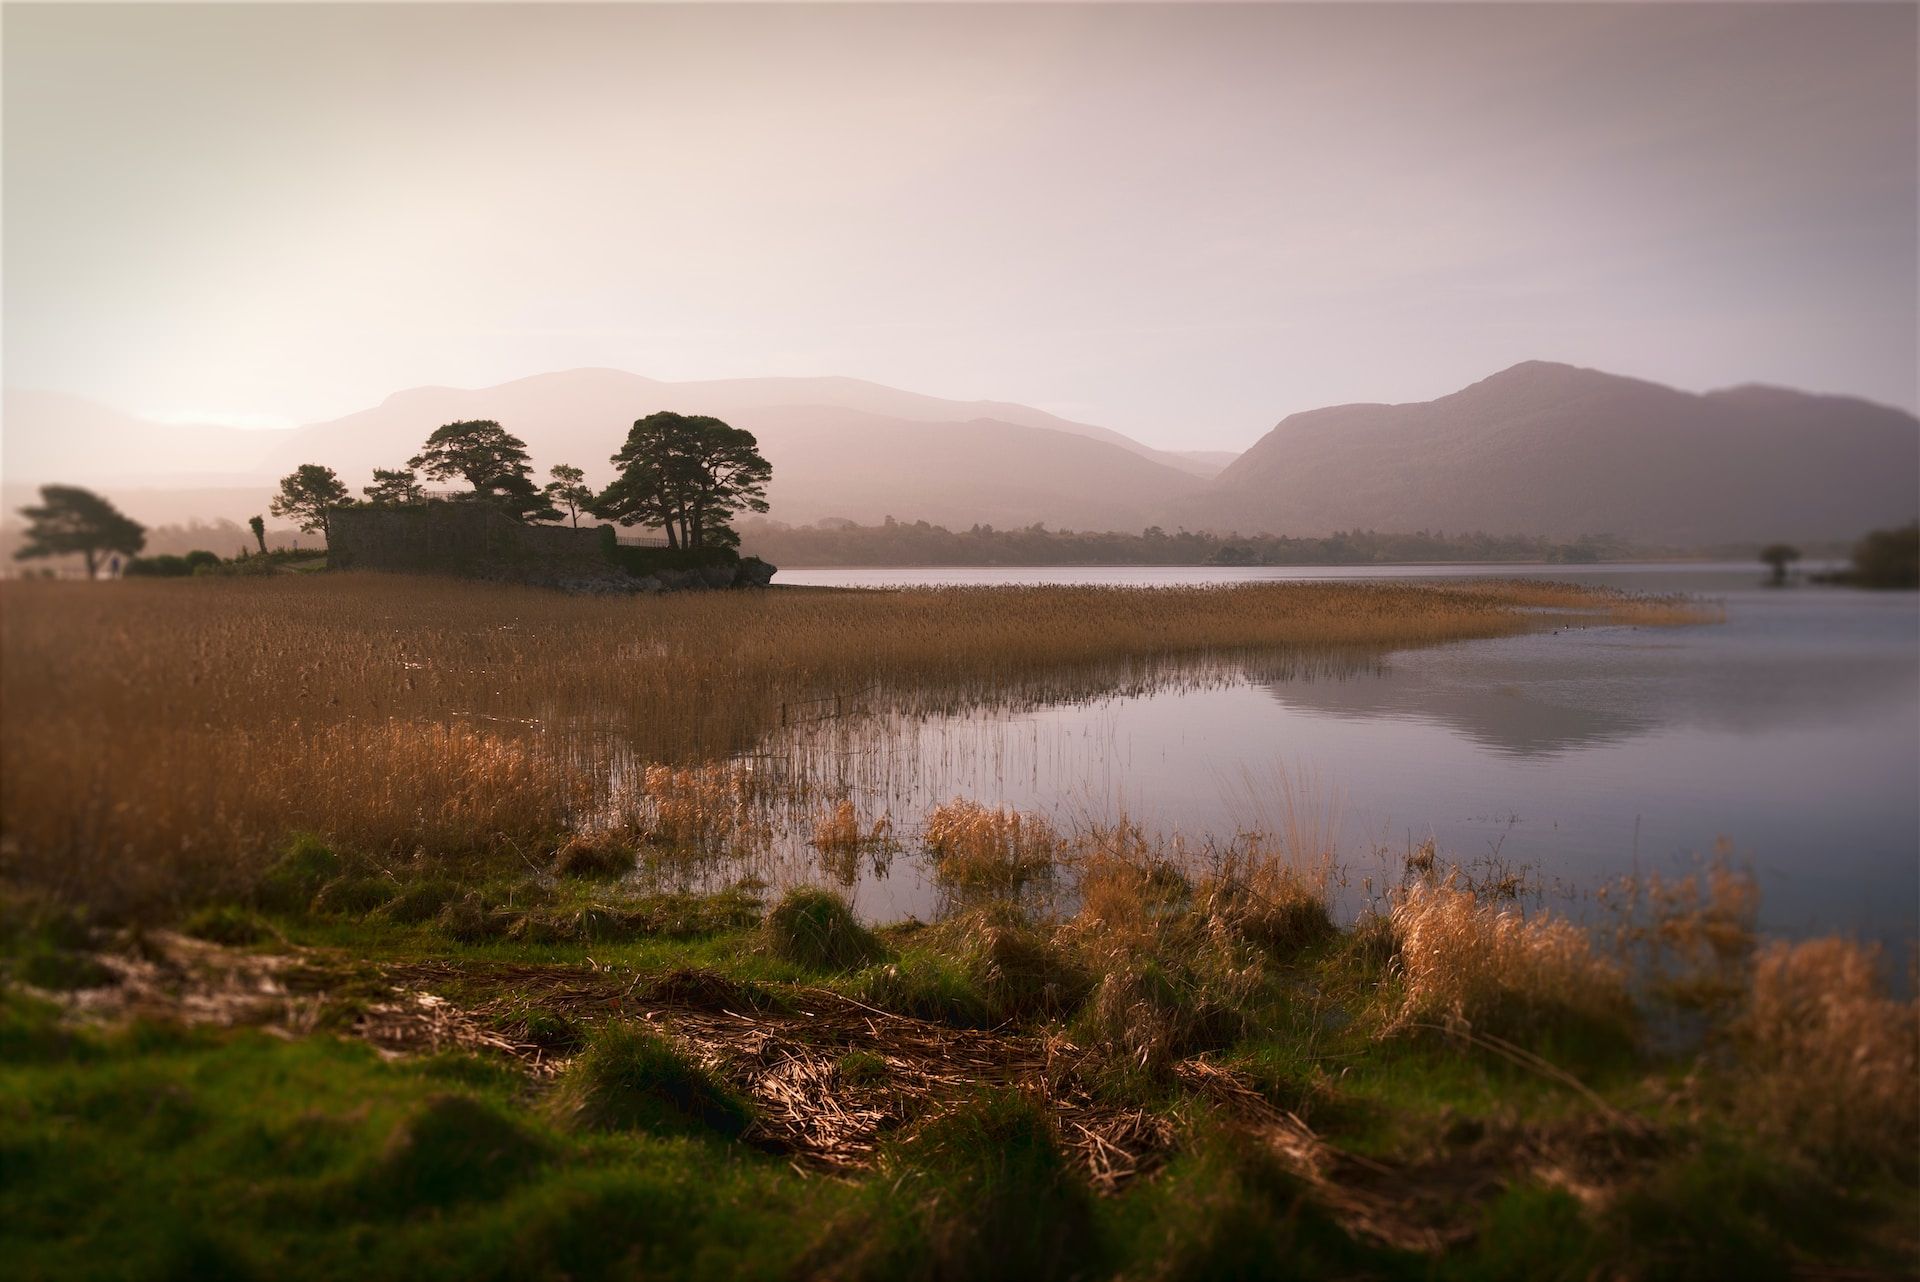 An early morning view of the lakes of Killarney